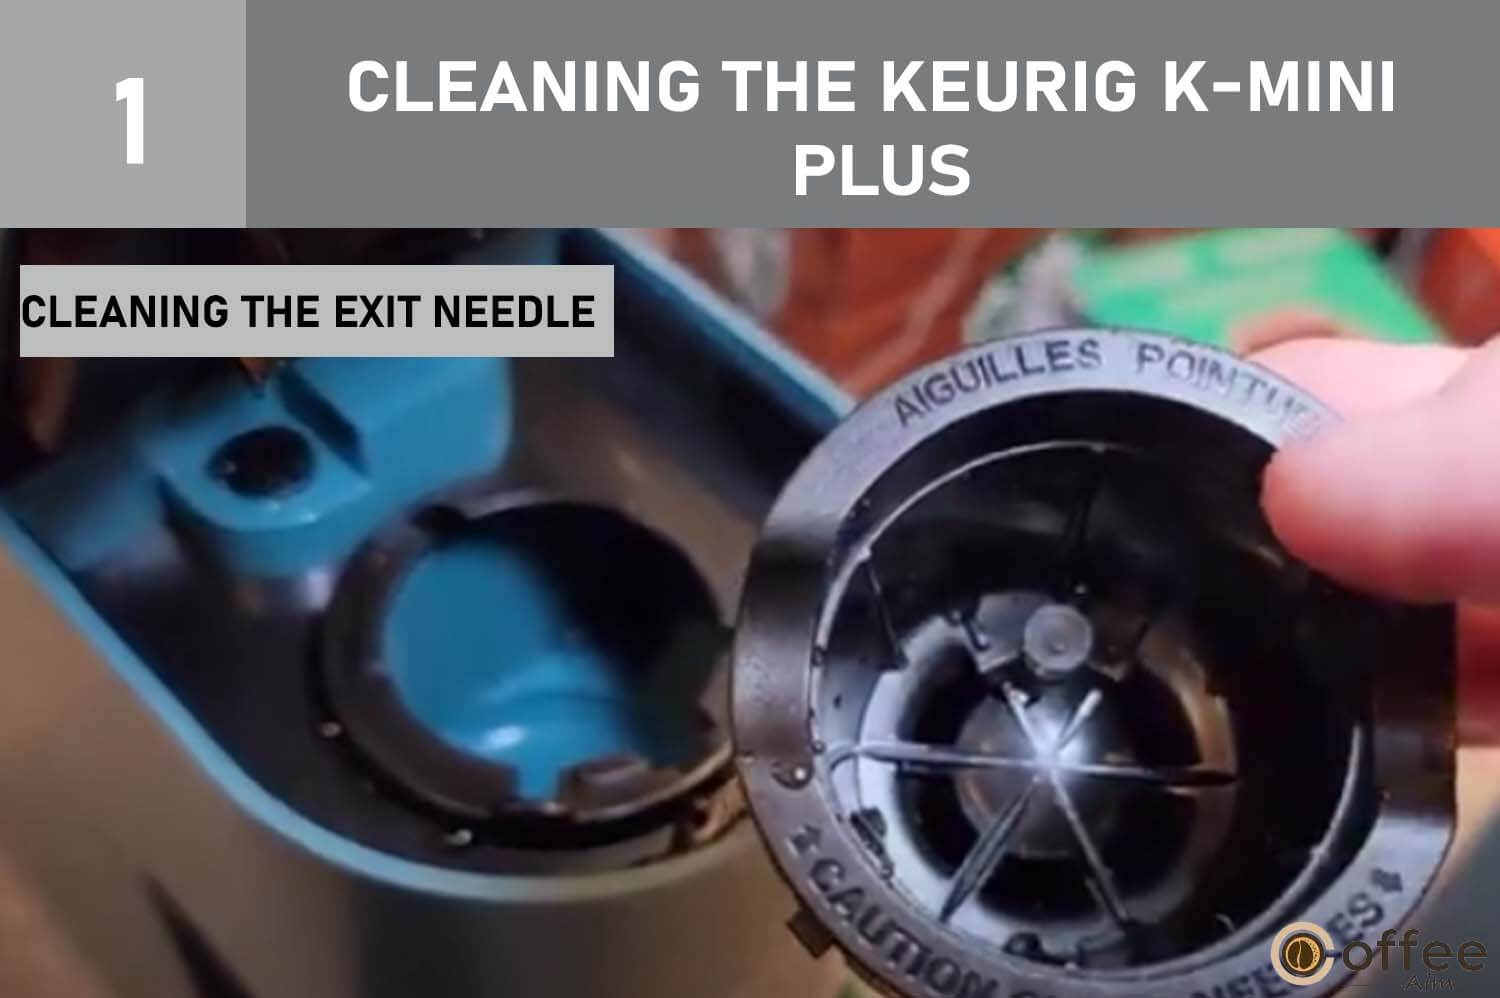 This image depicts the process of "Cleaning the Exit Needle" as part of the maintenance for the Keurig K-Mini Plus, as discussed in our article "Keurig K-Mini Plus Problems."





